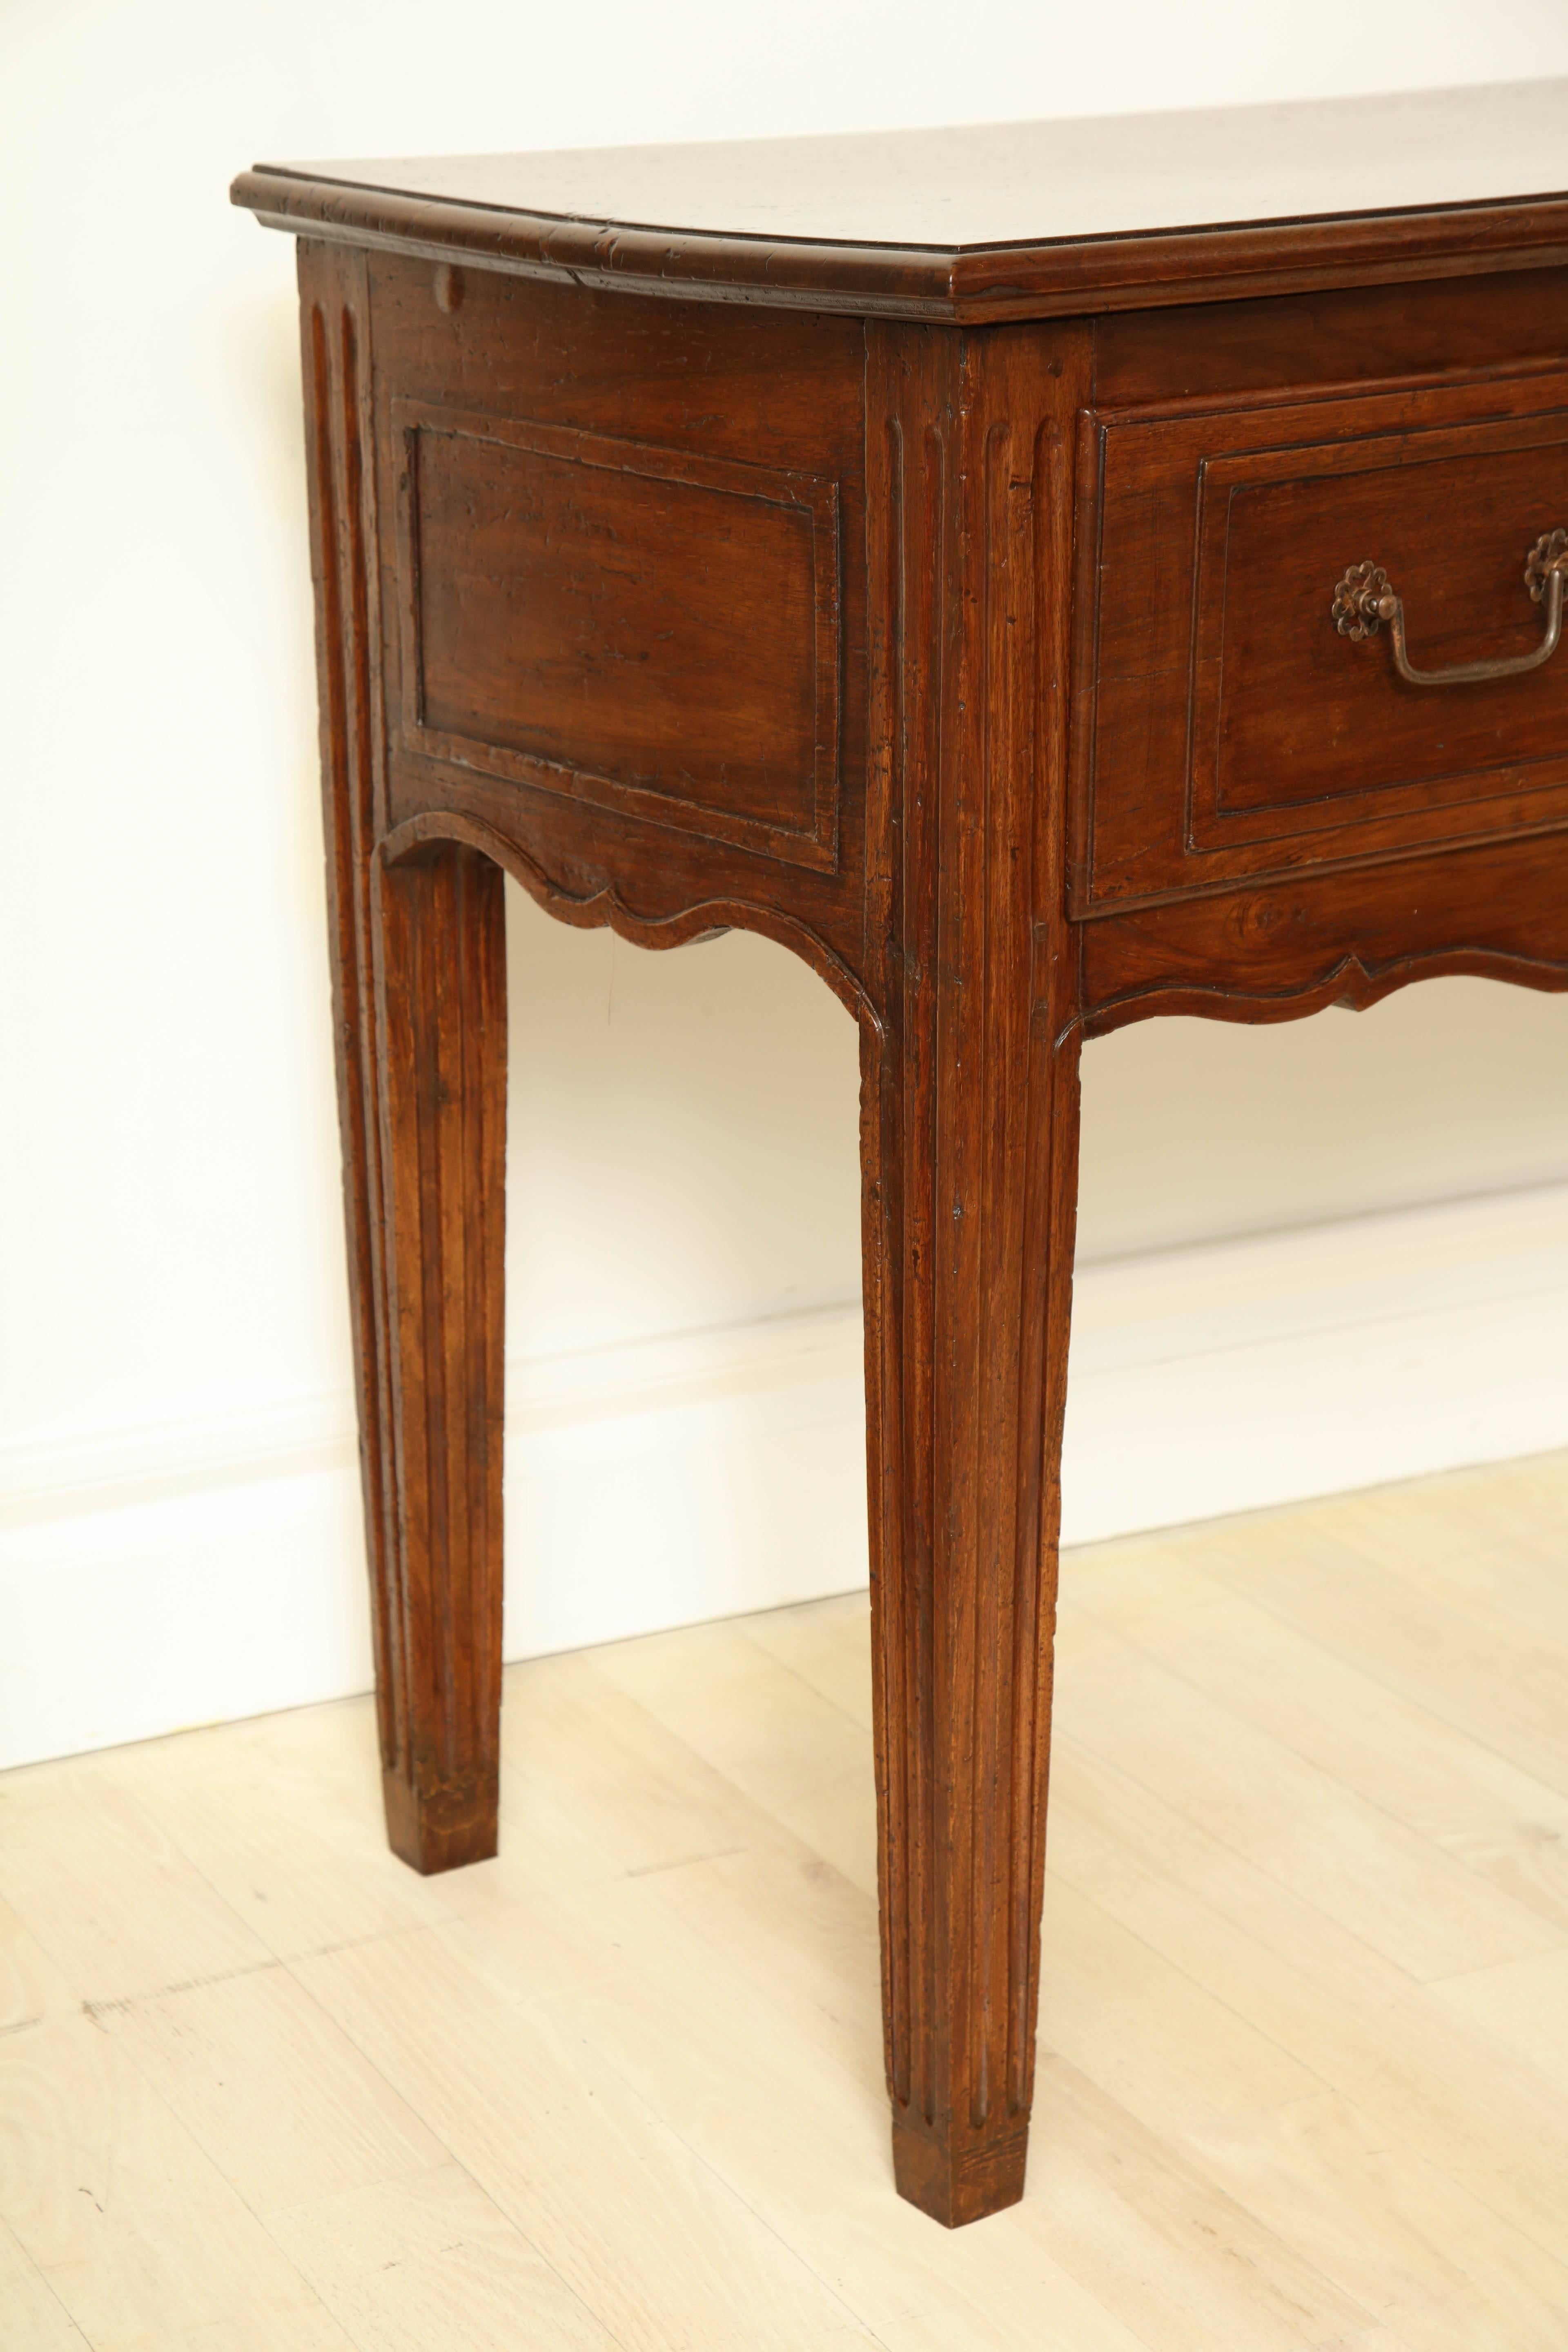 18th century French walnut console table with fluted tapered legs, shaped apron and single paneled drawer with iron handles.




Available to see in our NYC Showroom 
BK Antiques
306 East 61st St. 2nd fl.
New York, NY 10065